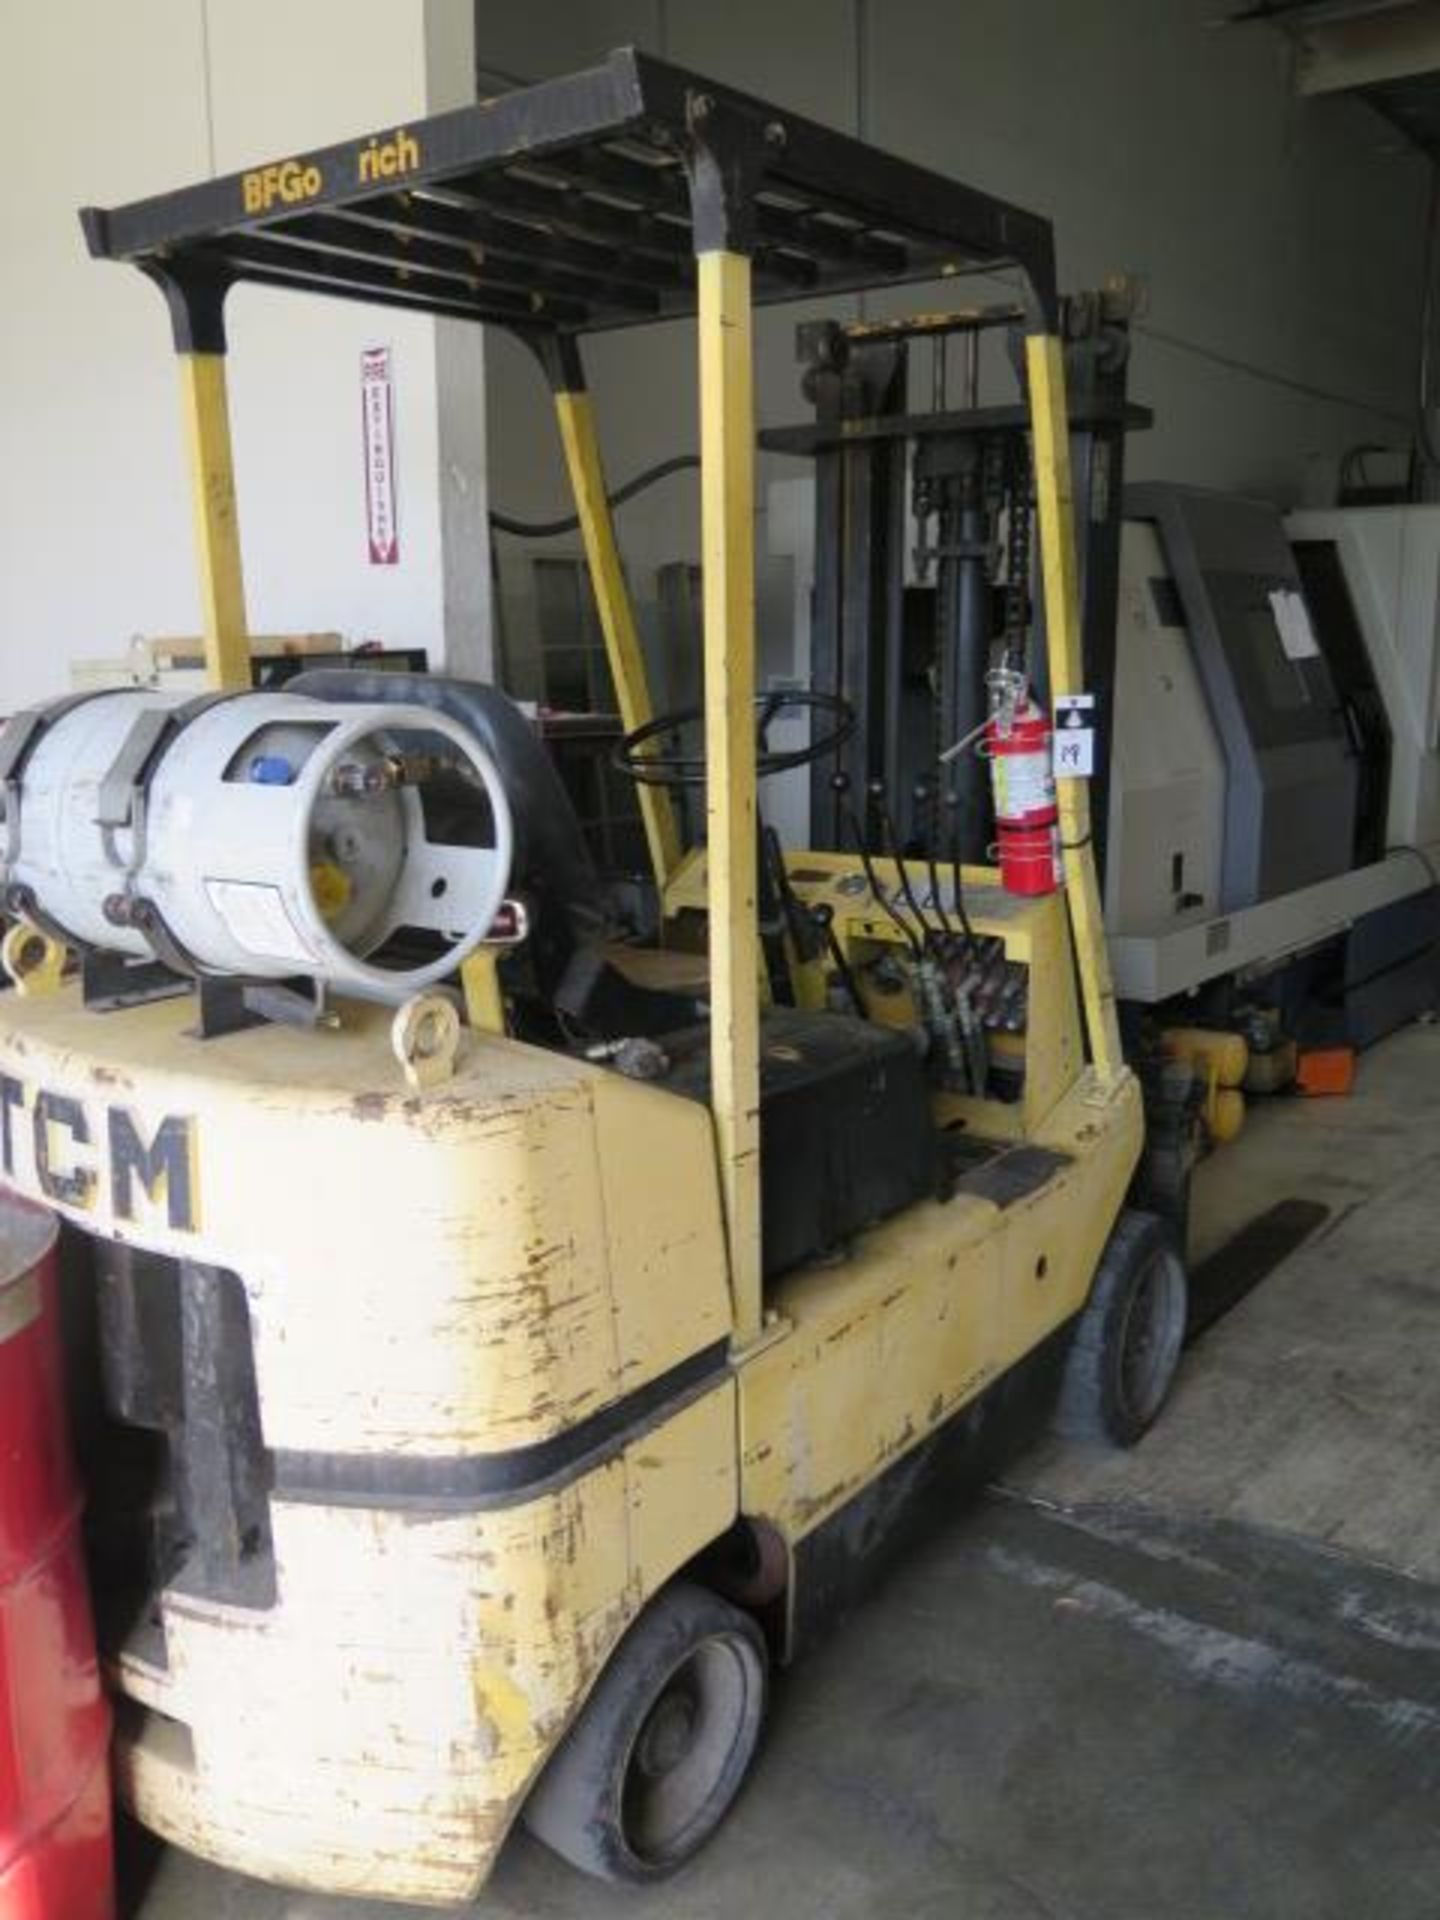 TCM FCG25N5 5000 Lb LPG Forklift s/n 3181144 w/ 2-Stage, 130” Lift Height, Solid Tires, SOLD AS IS - Image 2 of 13